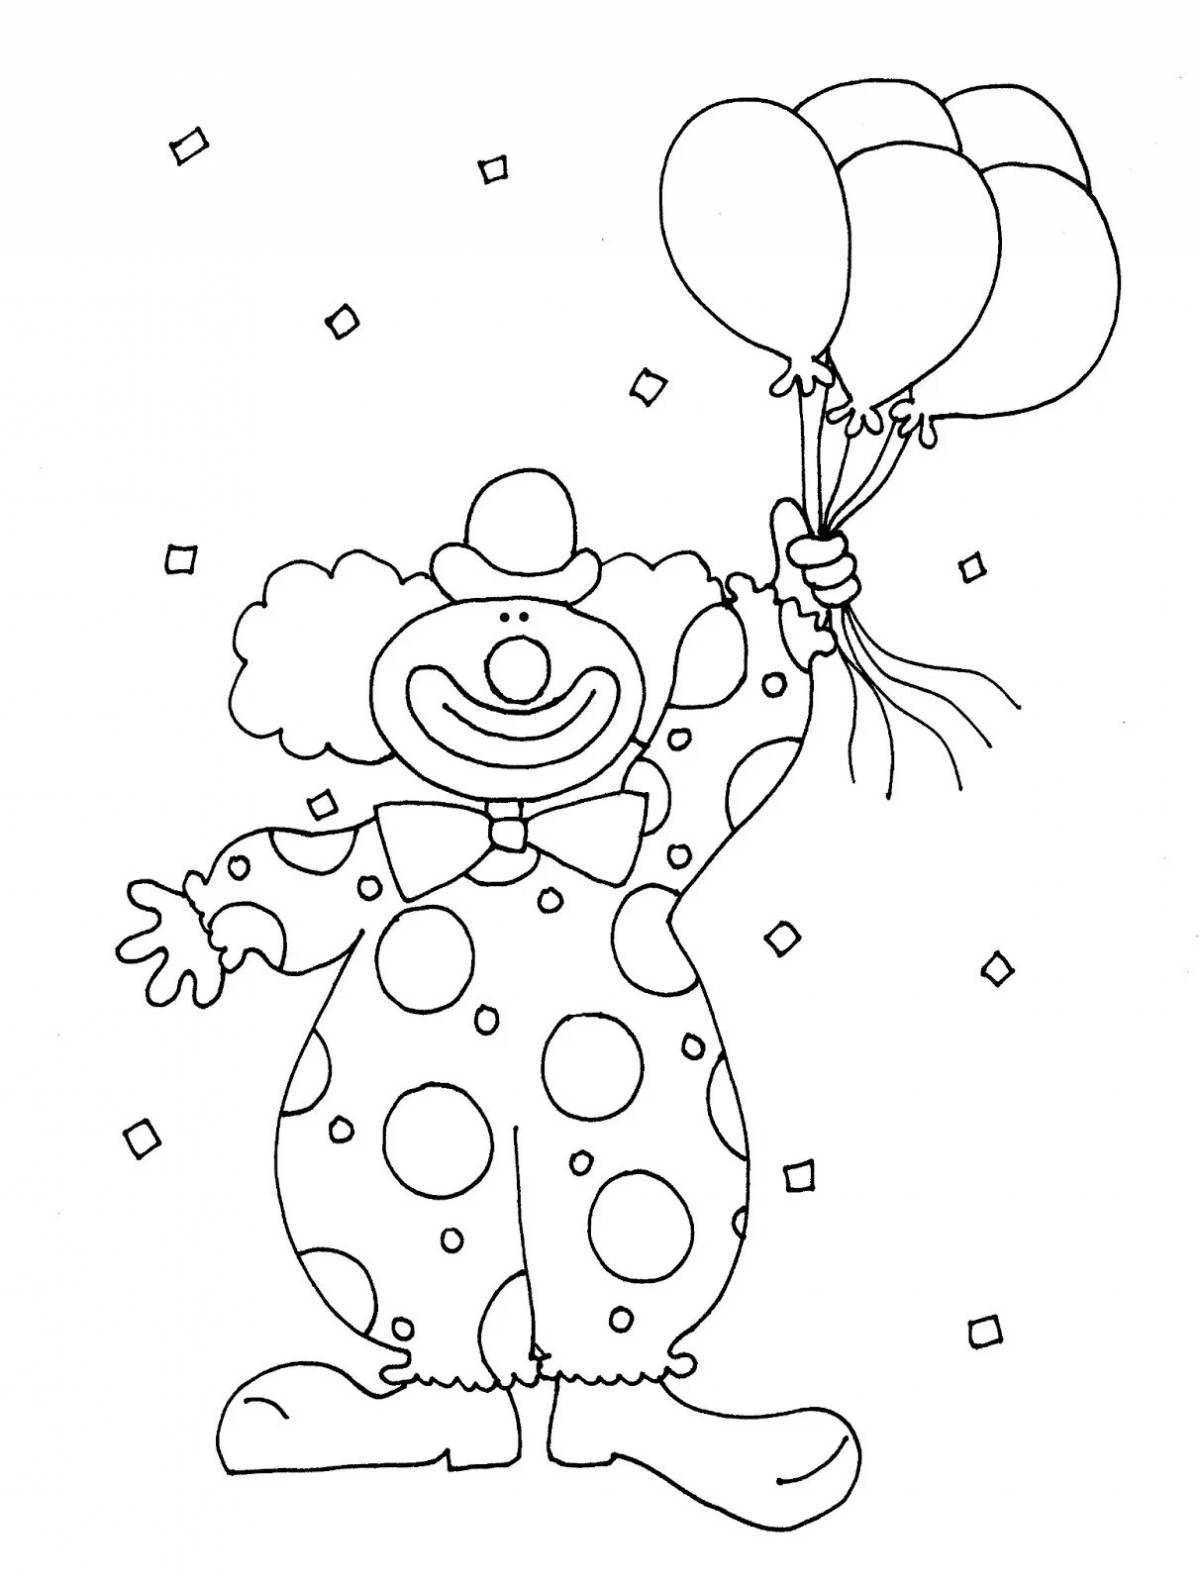 Rampant clown with balloons